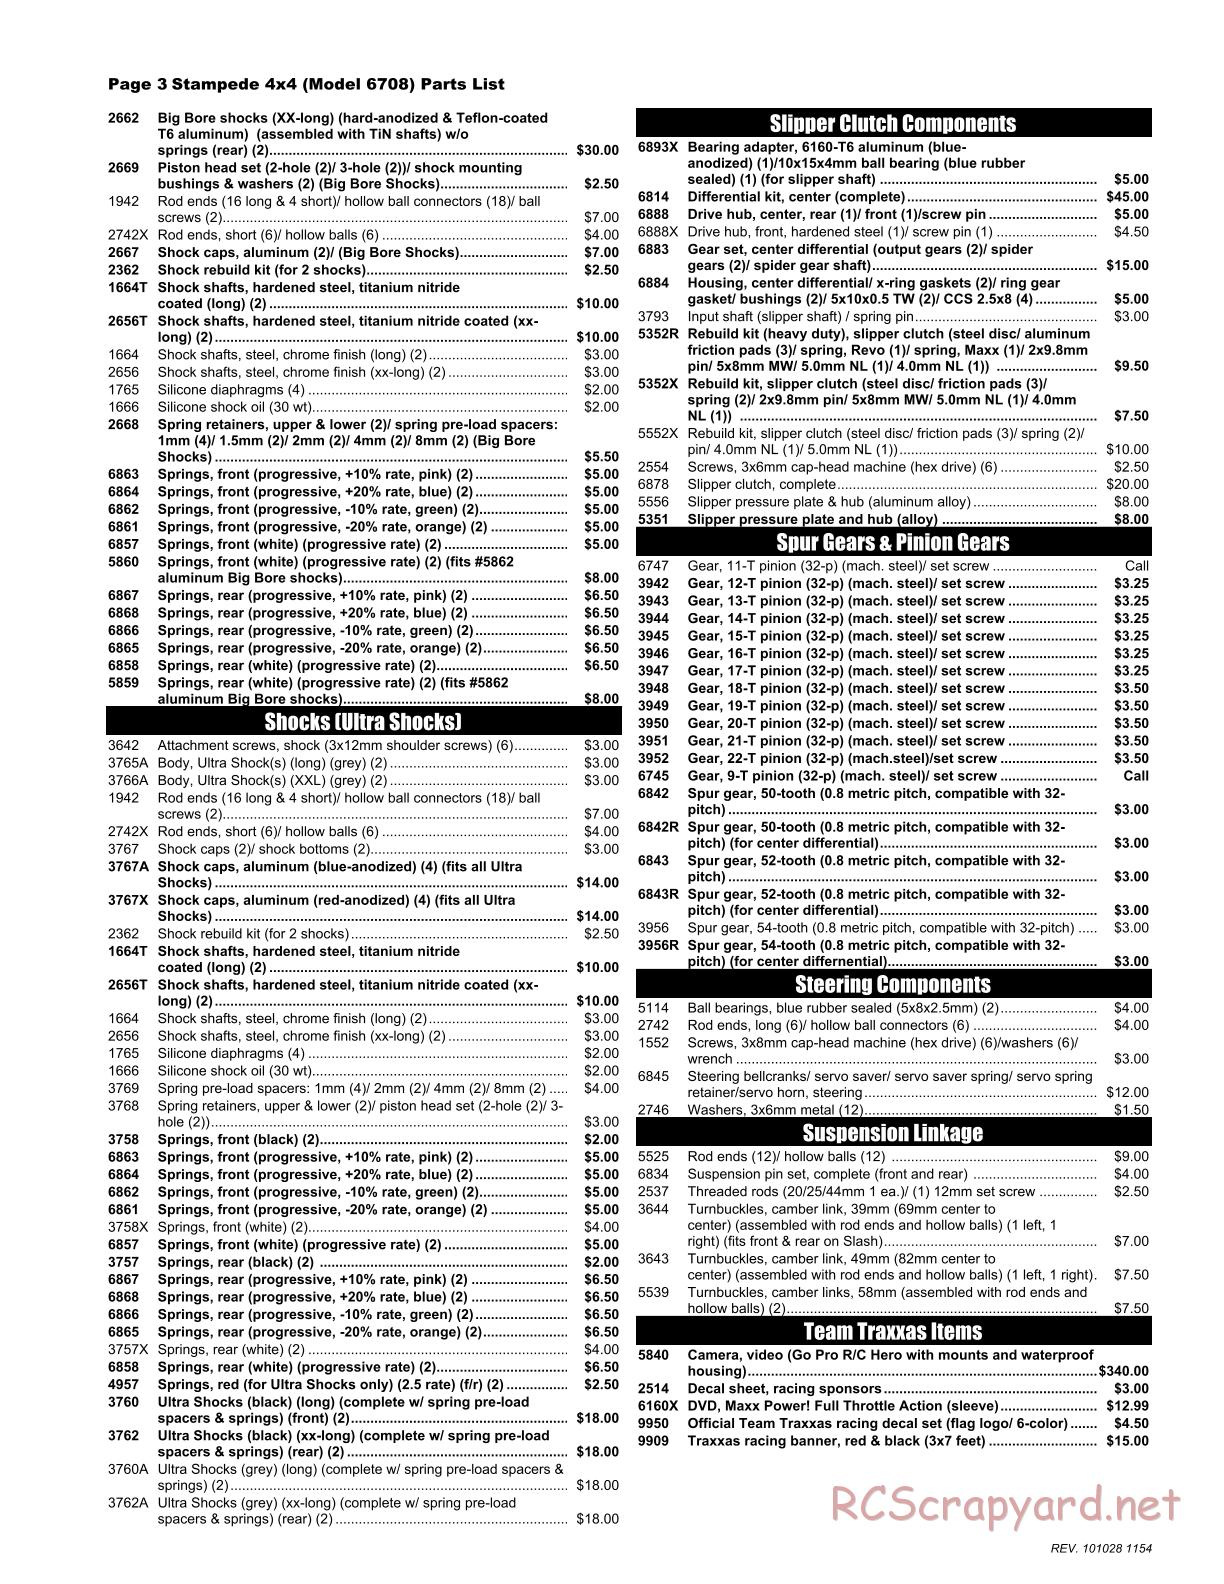 Traxxas - Stampede 4x4 VXL (2010) - Parts List - Page 3